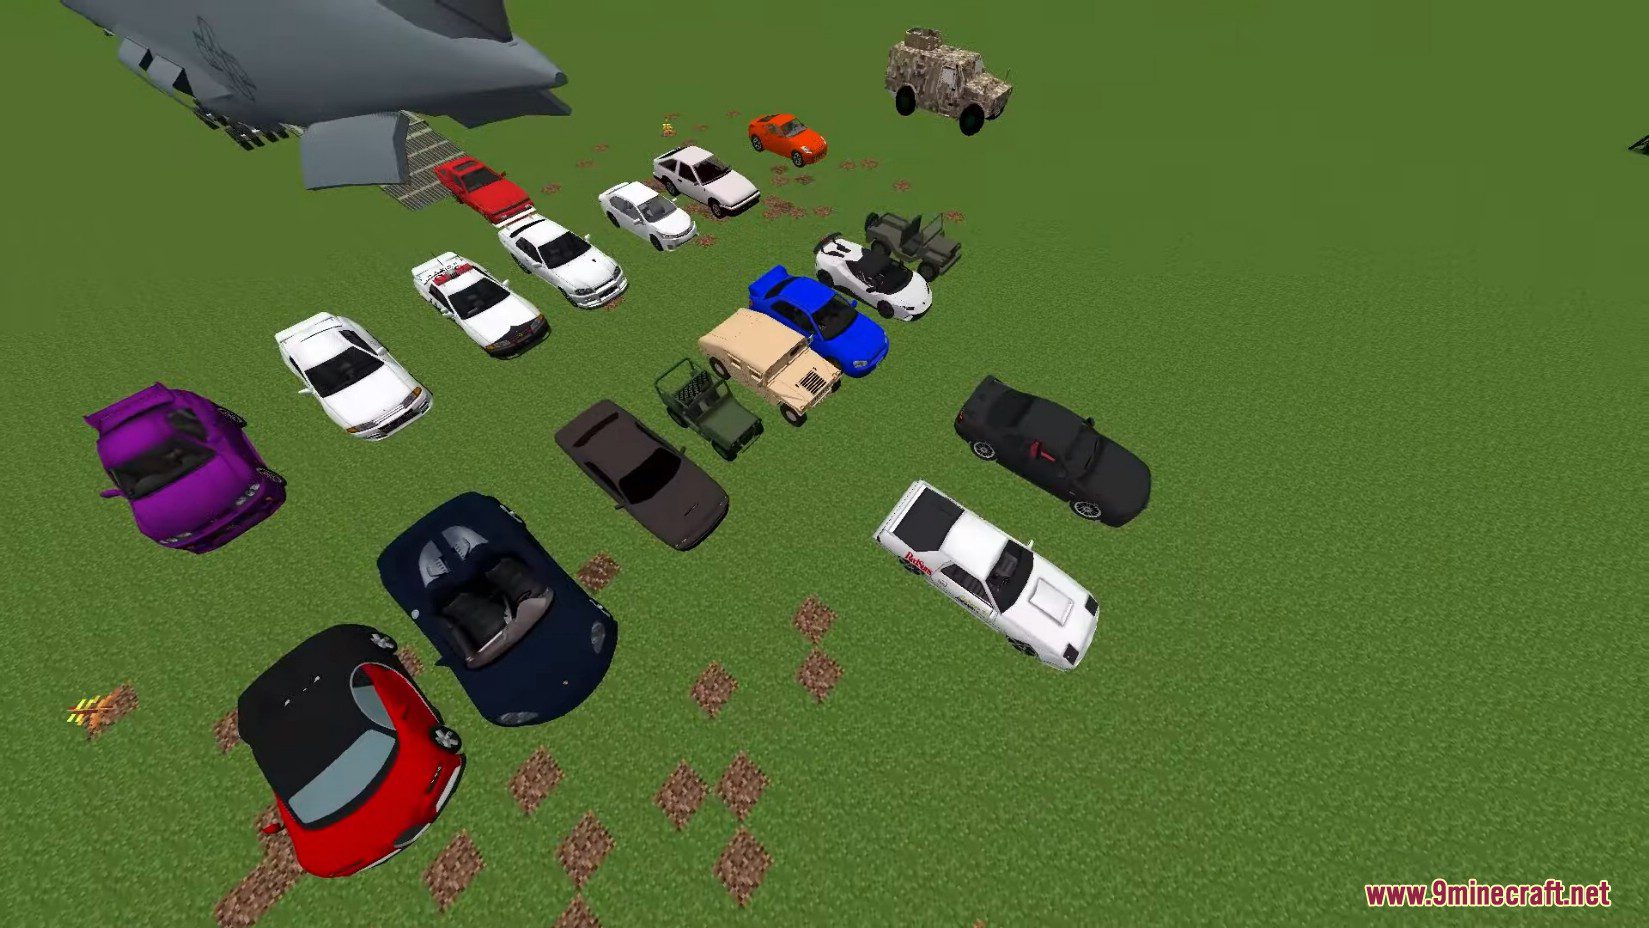 Mcheli Overdrive Mod (1.7.10) - Largest Cars and Planes Mod 5